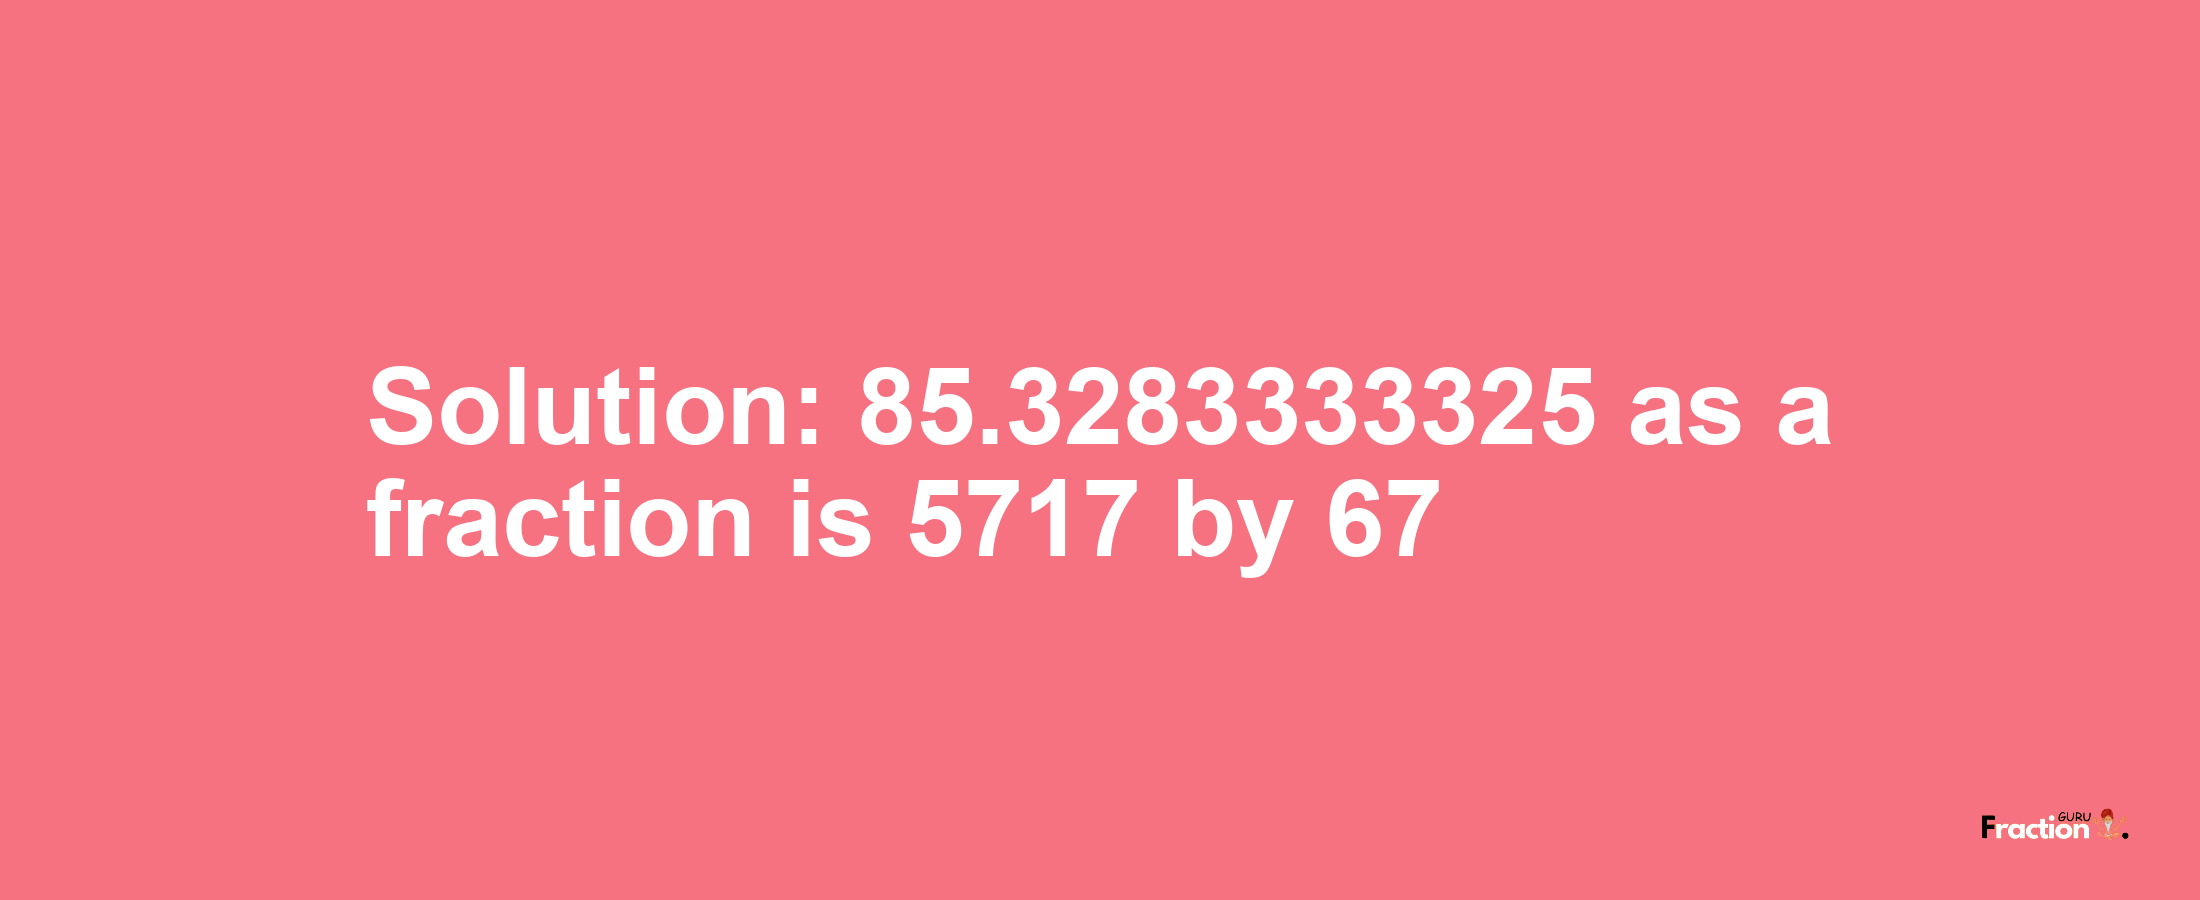 Solution:85.3283333325 as a fraction is 5717/67